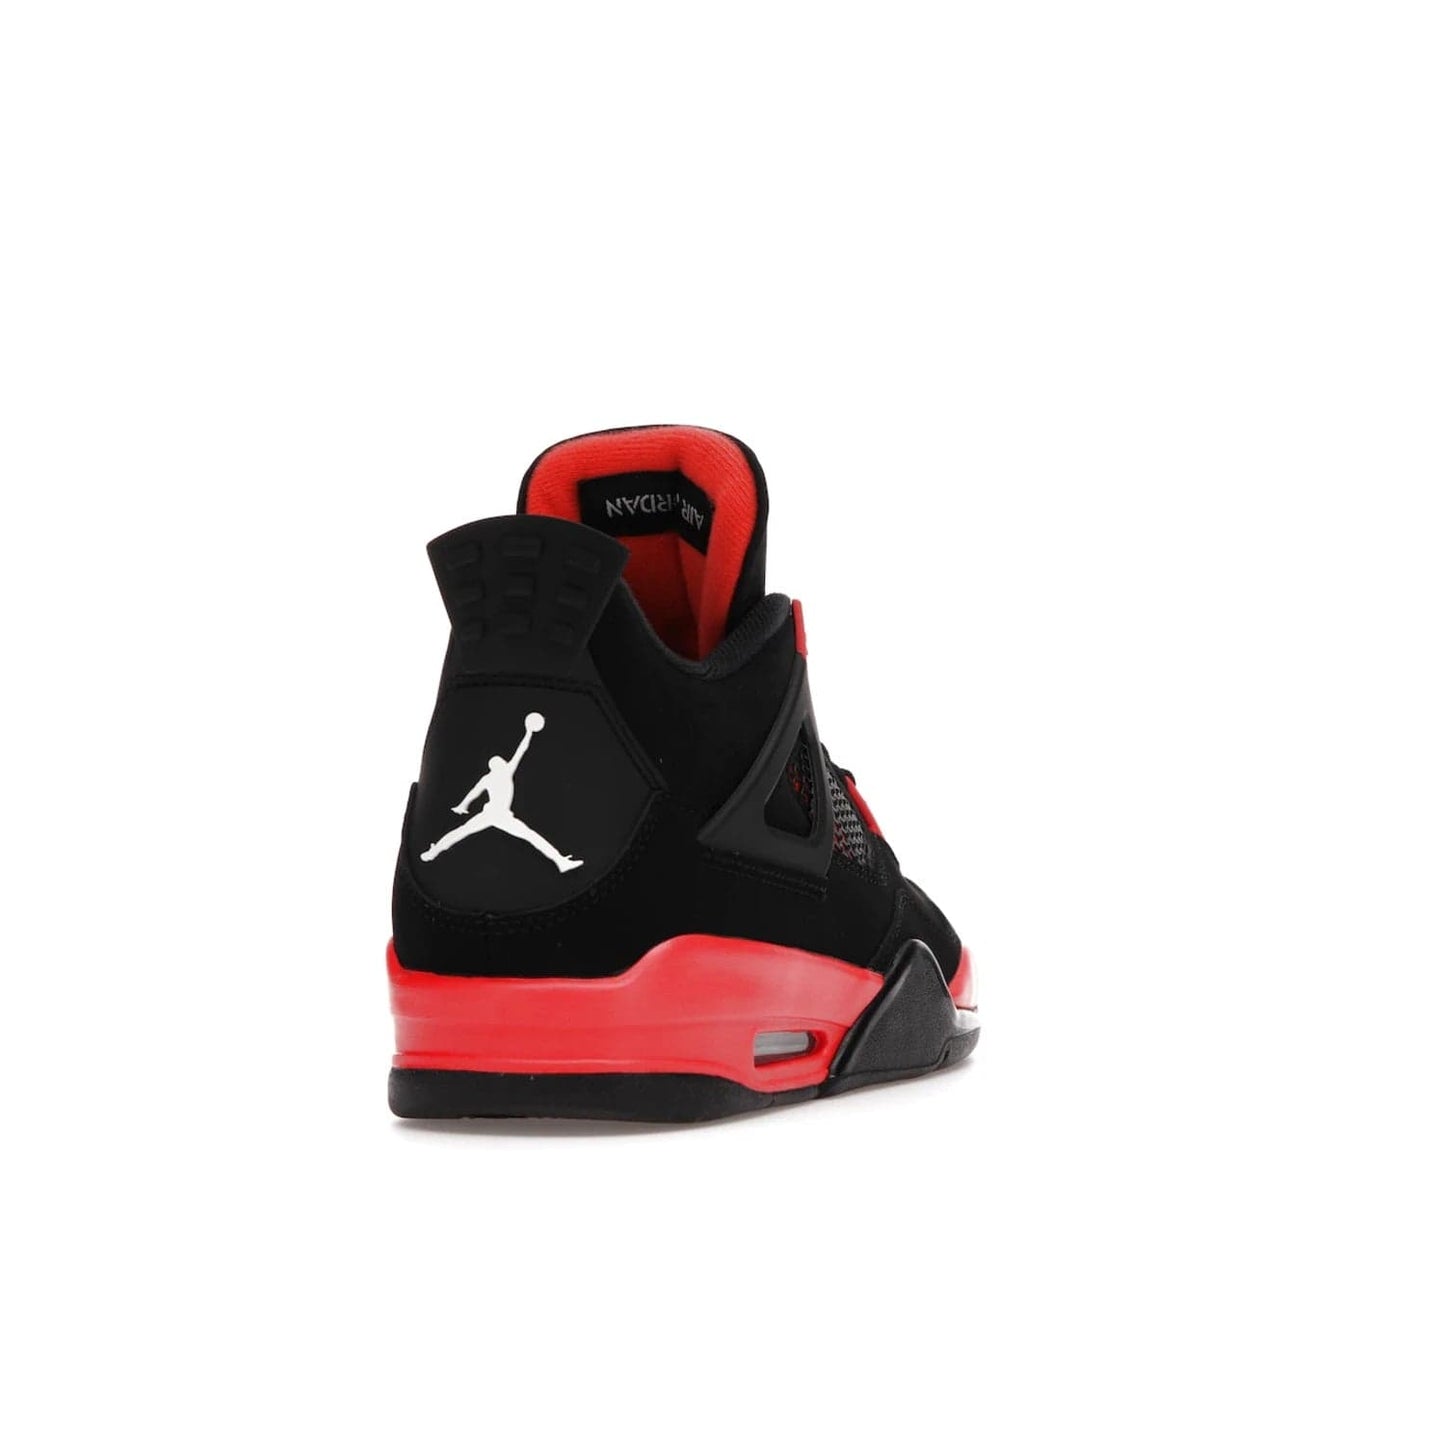 Jordan 4 Retro Red Thunder - Image 30 - Only at www.BallersClubKickz.com - Upscale your footwear with the Air Jordan 4 Retro Red Thunder. Featuring a Durabuck upper, red underlays, signature Flight patch, and vibrant red midsole, this retro sneaker adds style and edge. Releases in January 2022.